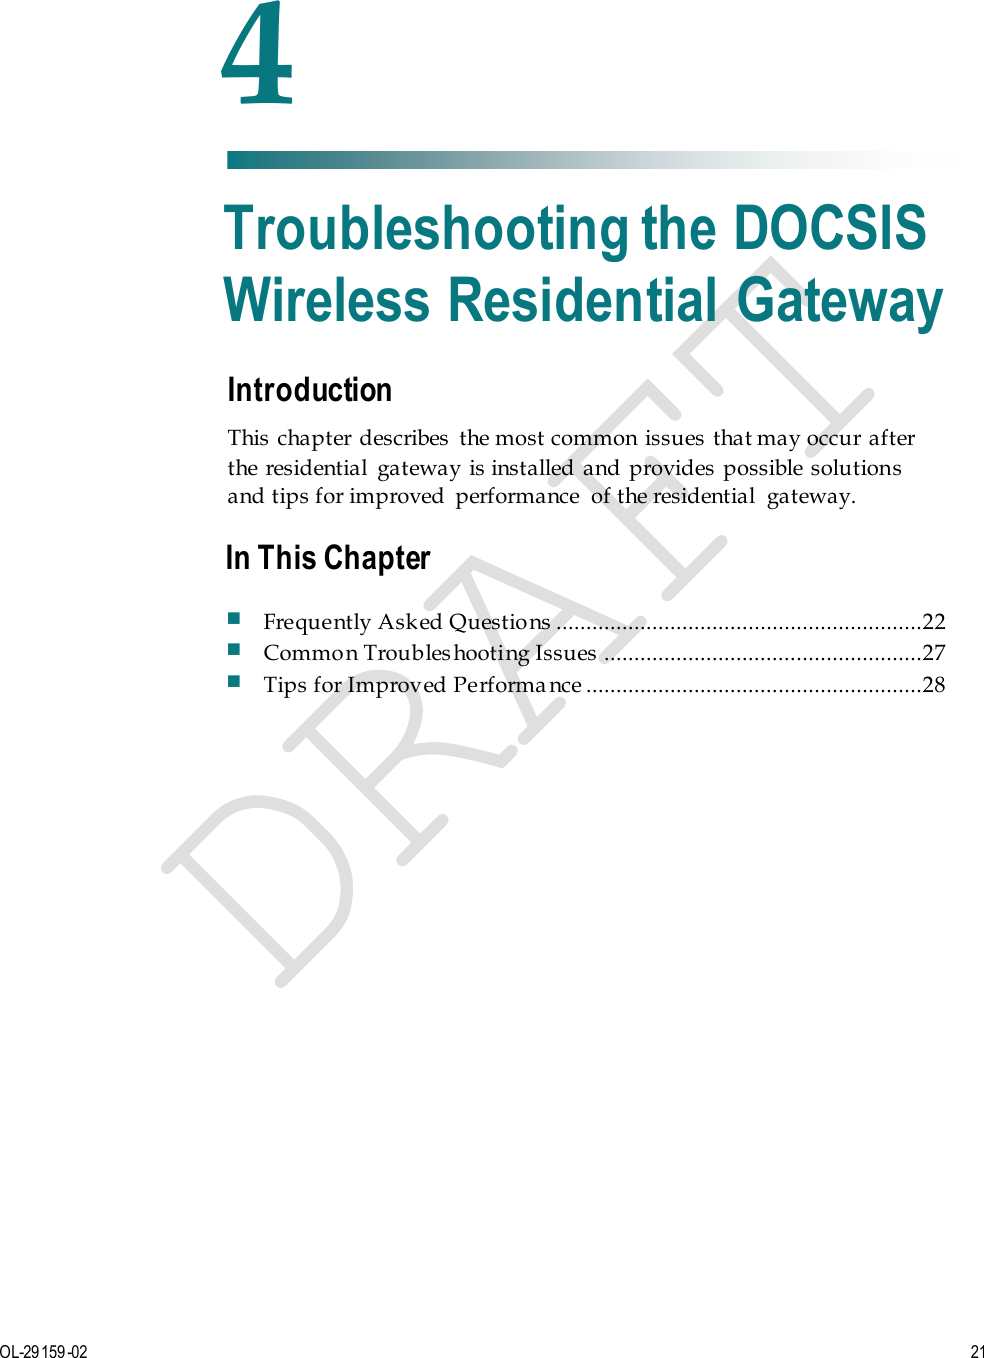   OL-29159-02 21  Introduction This  chapter  describes  the most common issues  that may occur after the residential  gateway is installed  and provides possible solutions and tips for improved  performance  of the residential  gateway.    4 Chapter 4 Troubleshooting the DOCSIS Wireless Residential Gateway In This Chapter  Frequently Asked Questions  .............................................................22  Common Troubleshooting Issues  .....................................................27  Tips for Improved Performa nce ........................................................28 